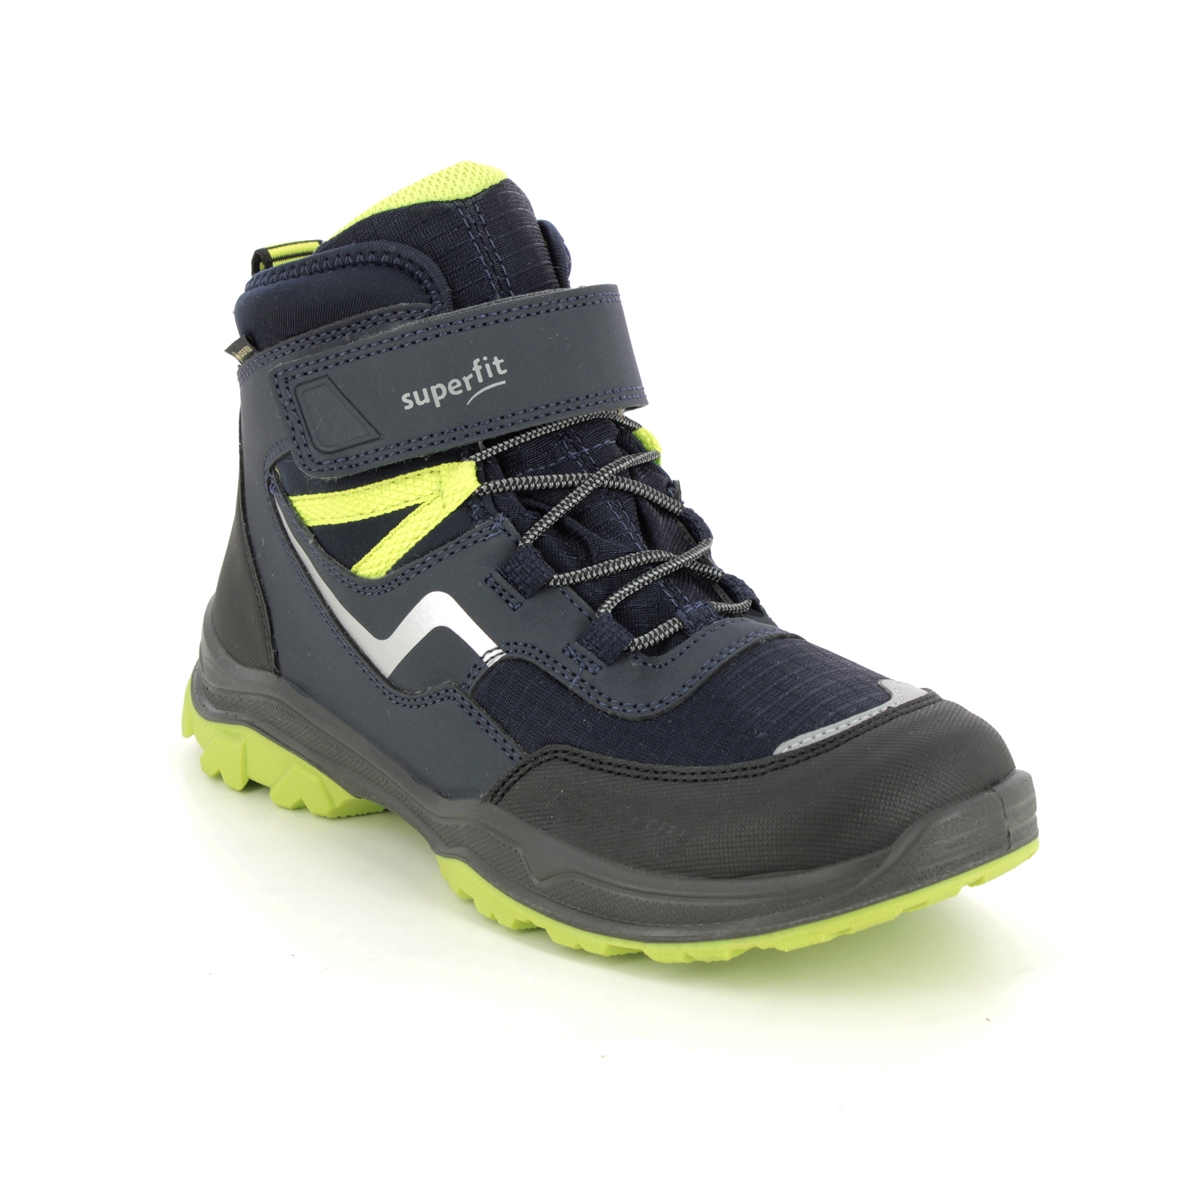 Superfit Jupiter Bungee Gtx Navy Lime Kids boys boots 1000074-8000 in a Plain Man-made in Size 39